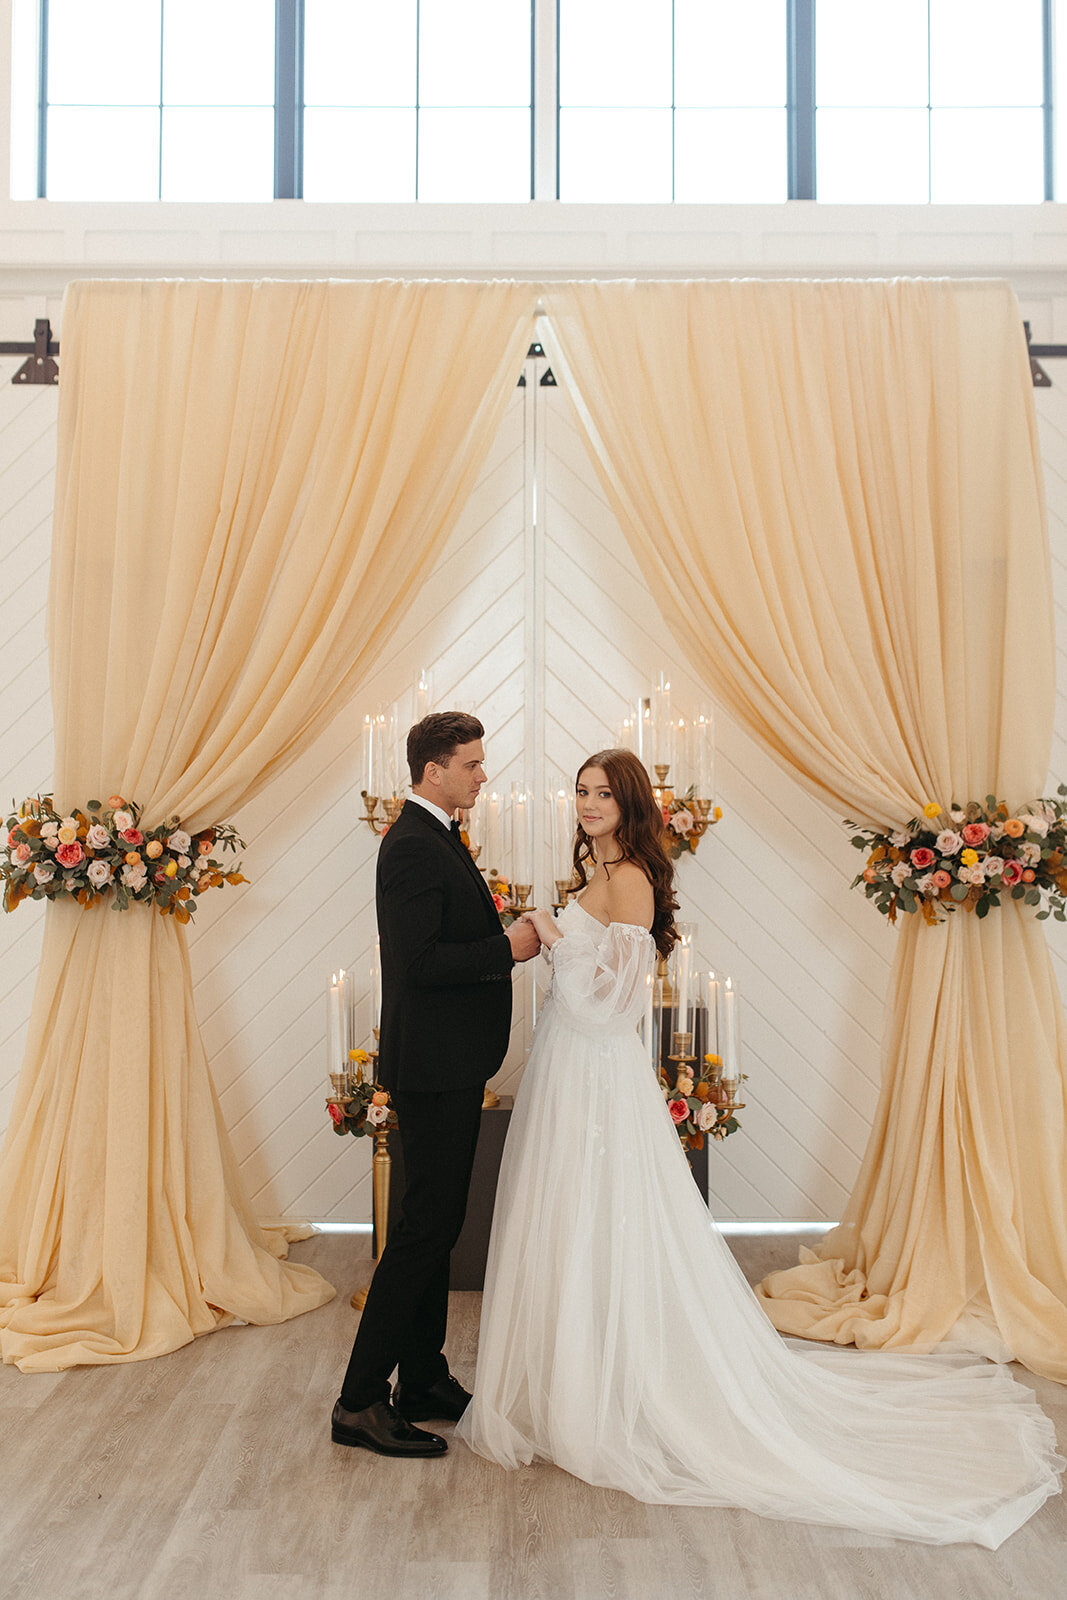 A bride and groom wearing a white wedding gown and black tuxedo hold hands in a bright and airy room filled with candles.